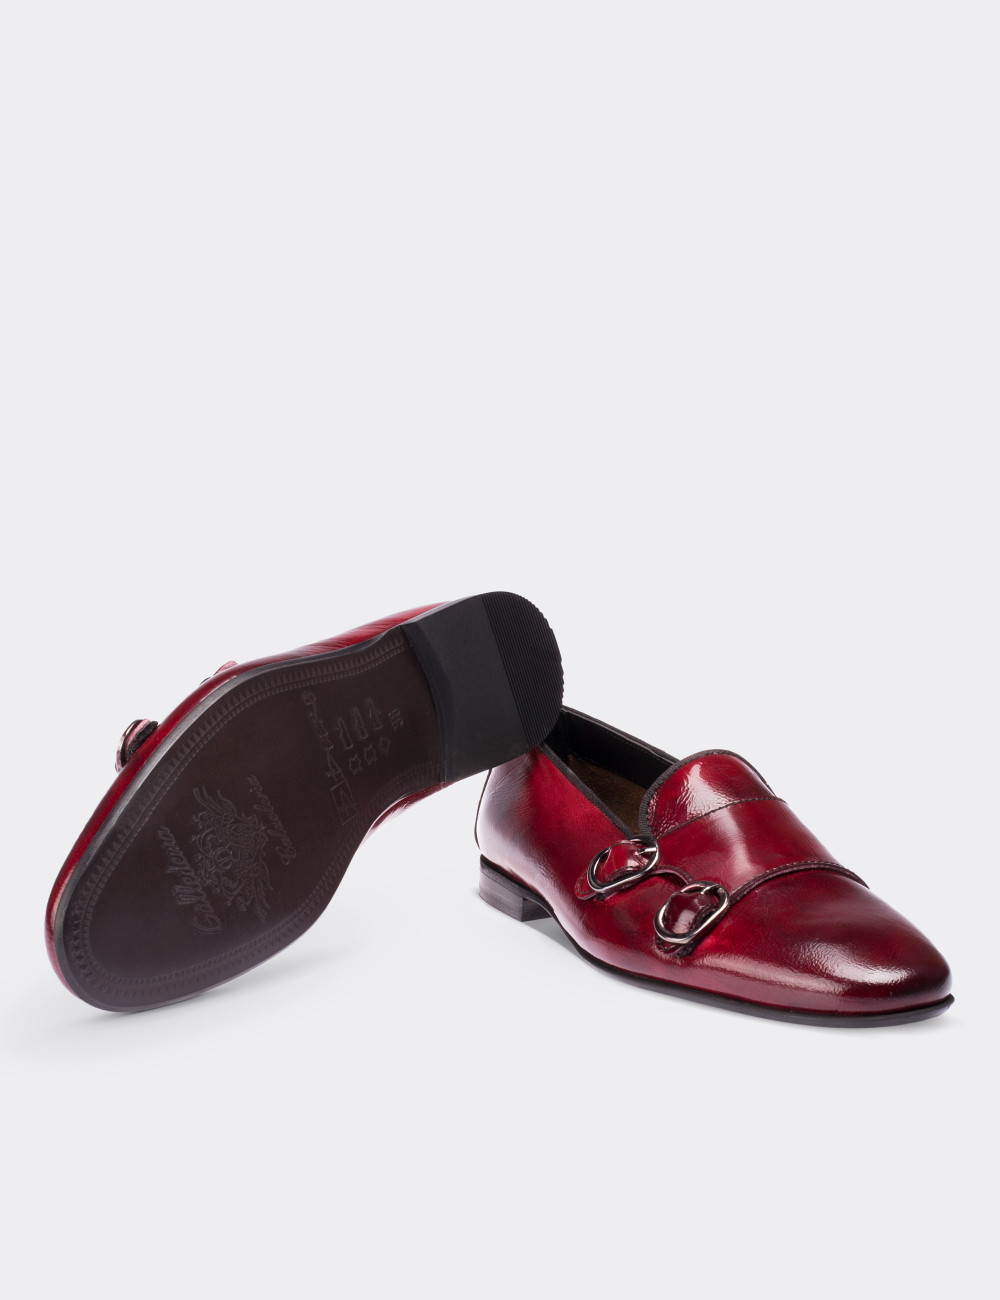 Burgundy Patent Leather Loafers - 01611ZBRDM01